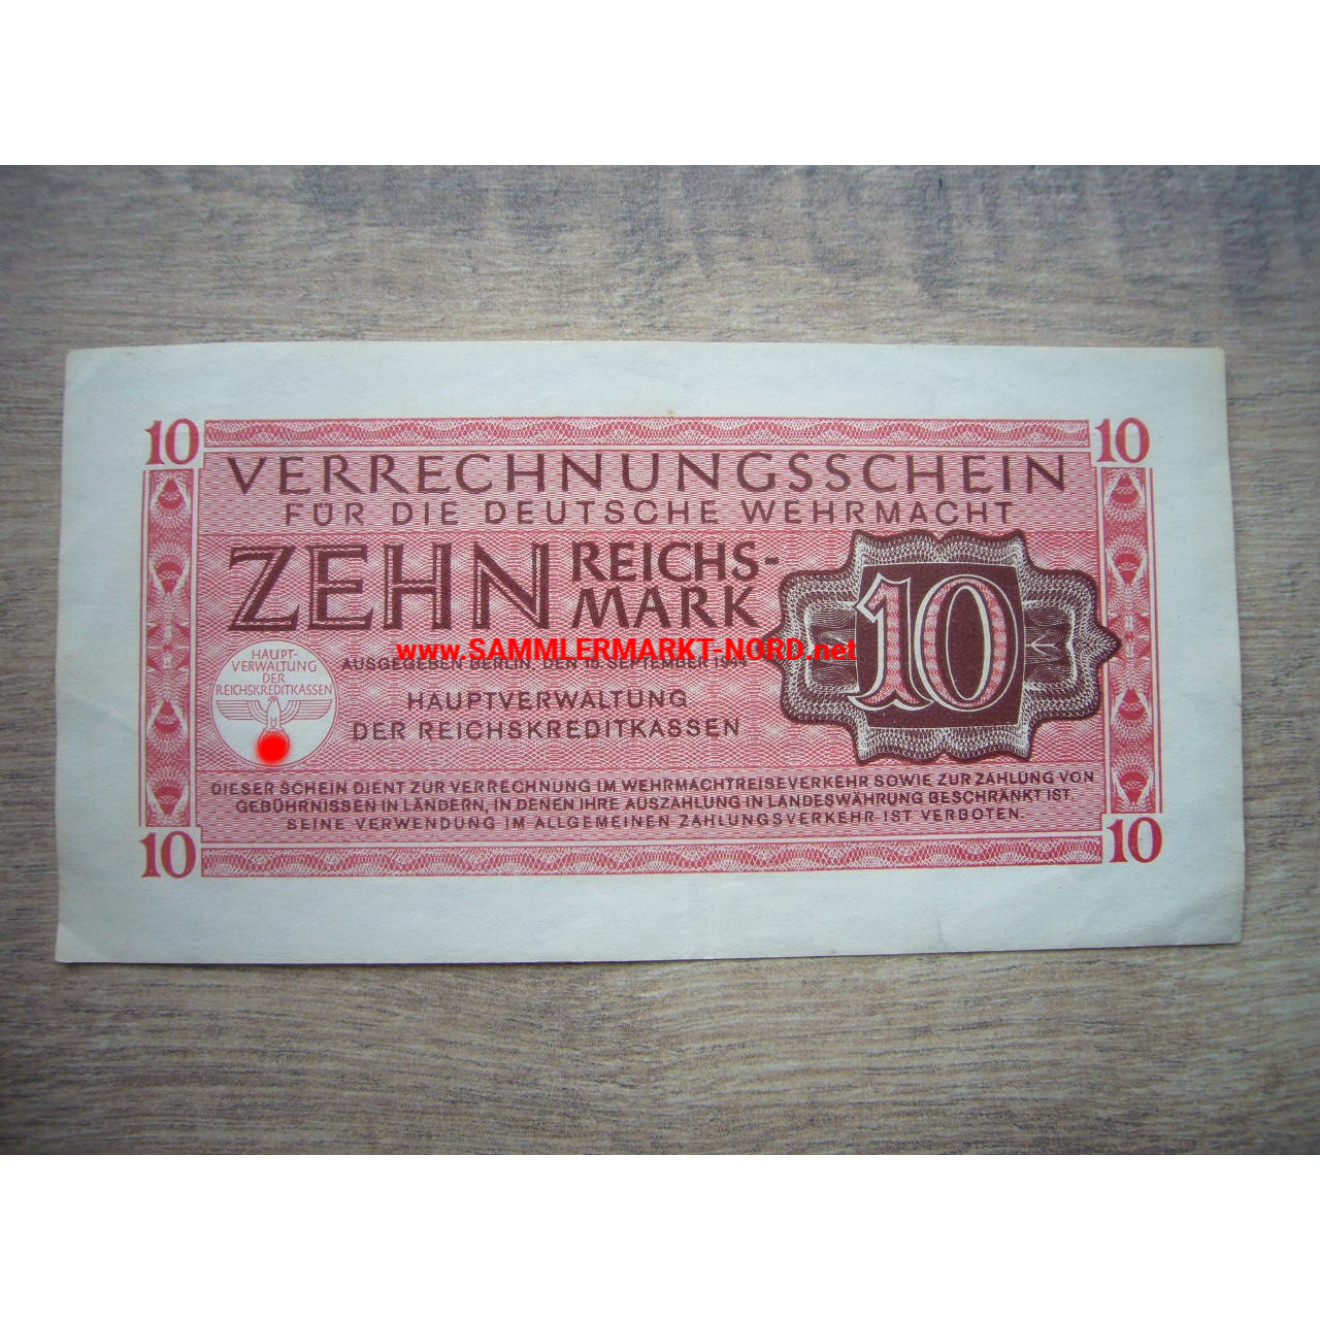 Bank note 10 RM for the German Wehrmacht